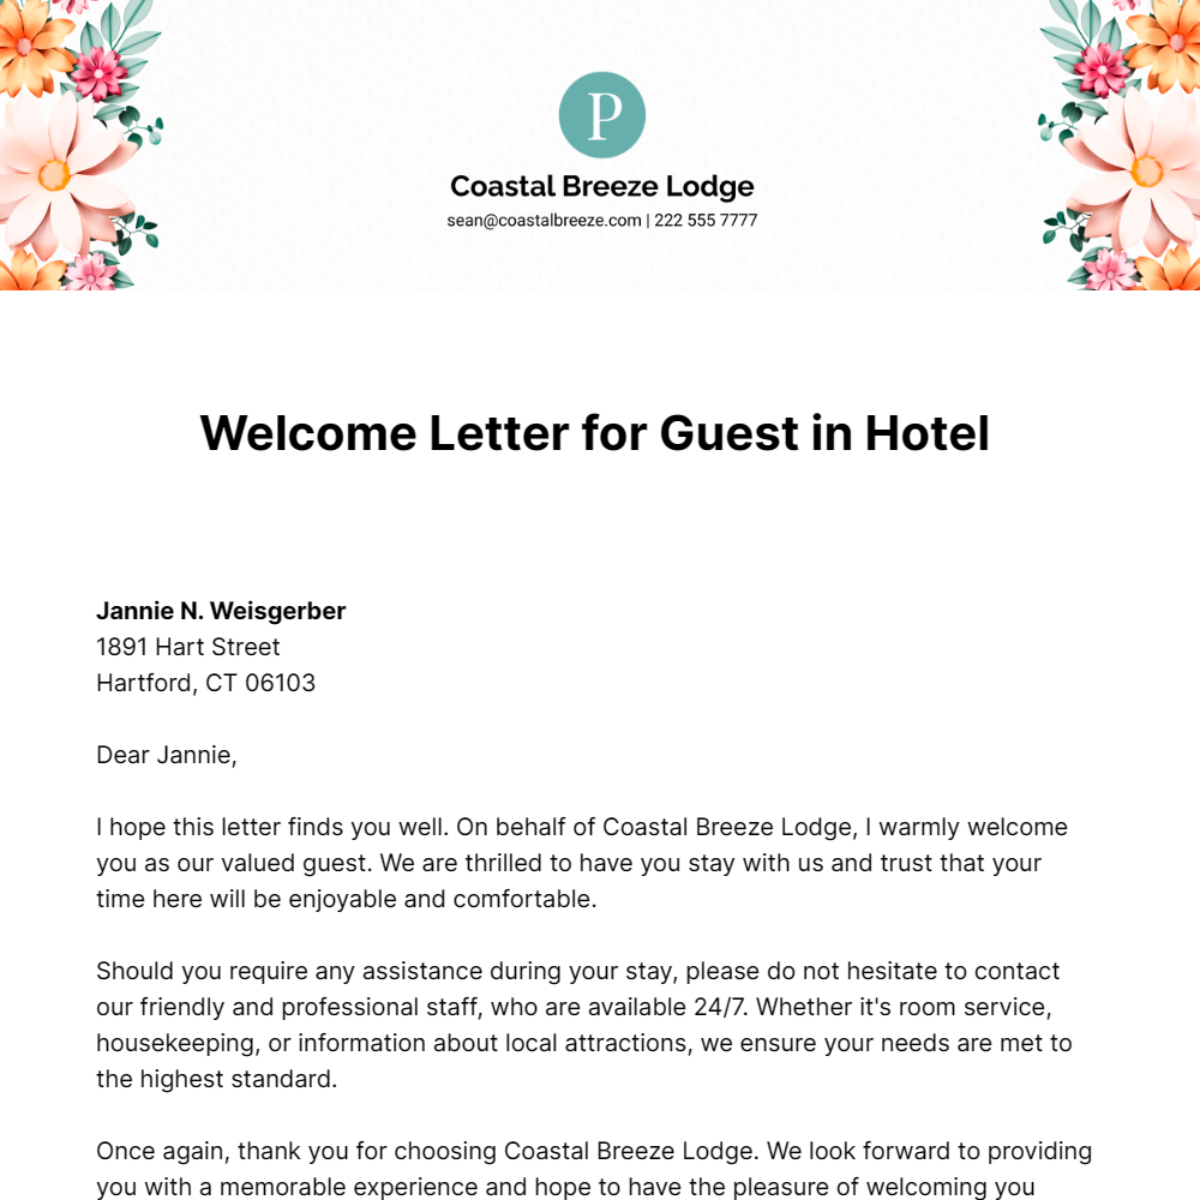 Welcome Letter for Guest in Hotel Template